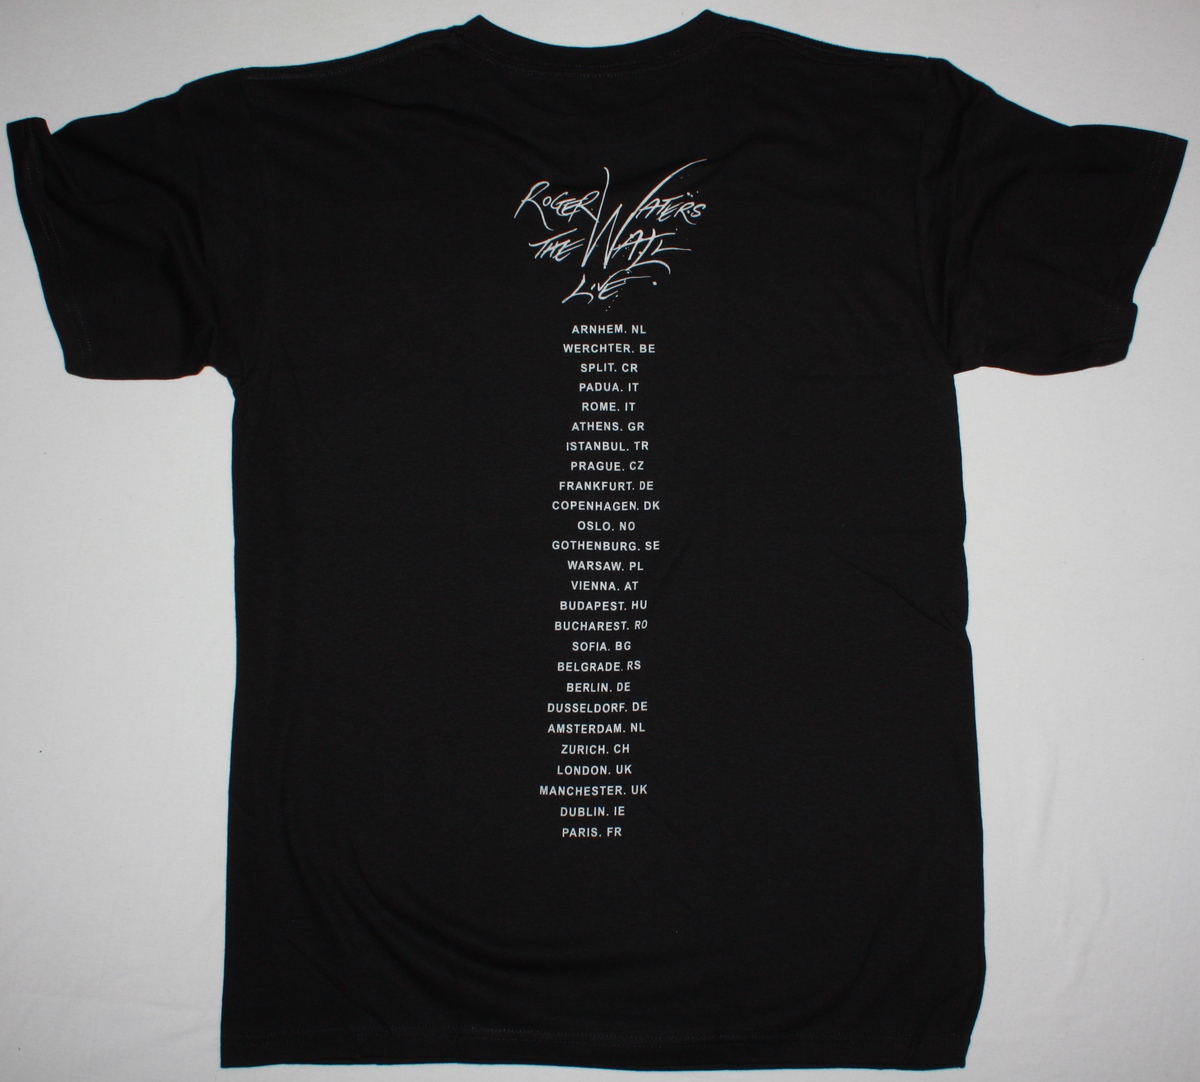 ROGER WATERS THE WALL RETURNS NEW BLACK T-SHIRT